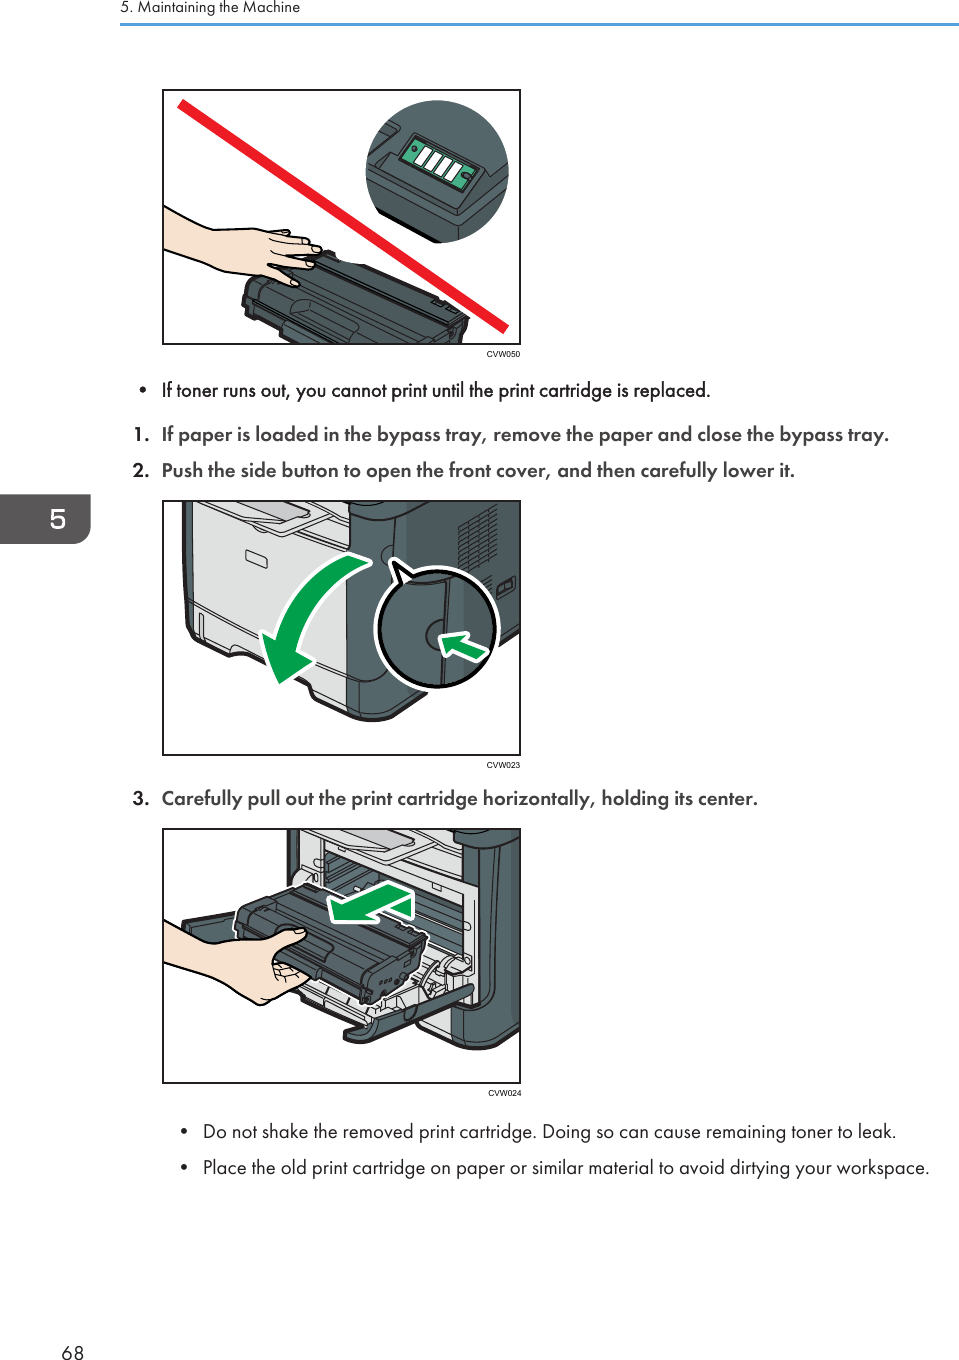 CVW050• If toner runs out, you cannot print until the print cartridge is replaced.1. If paper is loaded in the bypass tray, remove the paper and close the bypass tray.2. Push the side button to open the front cover, and then carefully lower it.CVW0233. Carefully pull out the print cartridge horizontally, holding its center.CVW024• Do not shake the removed print cartridge. Doing so can cause remaining toner to leak.•Place the old print cartridge on paper or similar material to avoid dirtying your workspace.5. Maintaining the Machine68